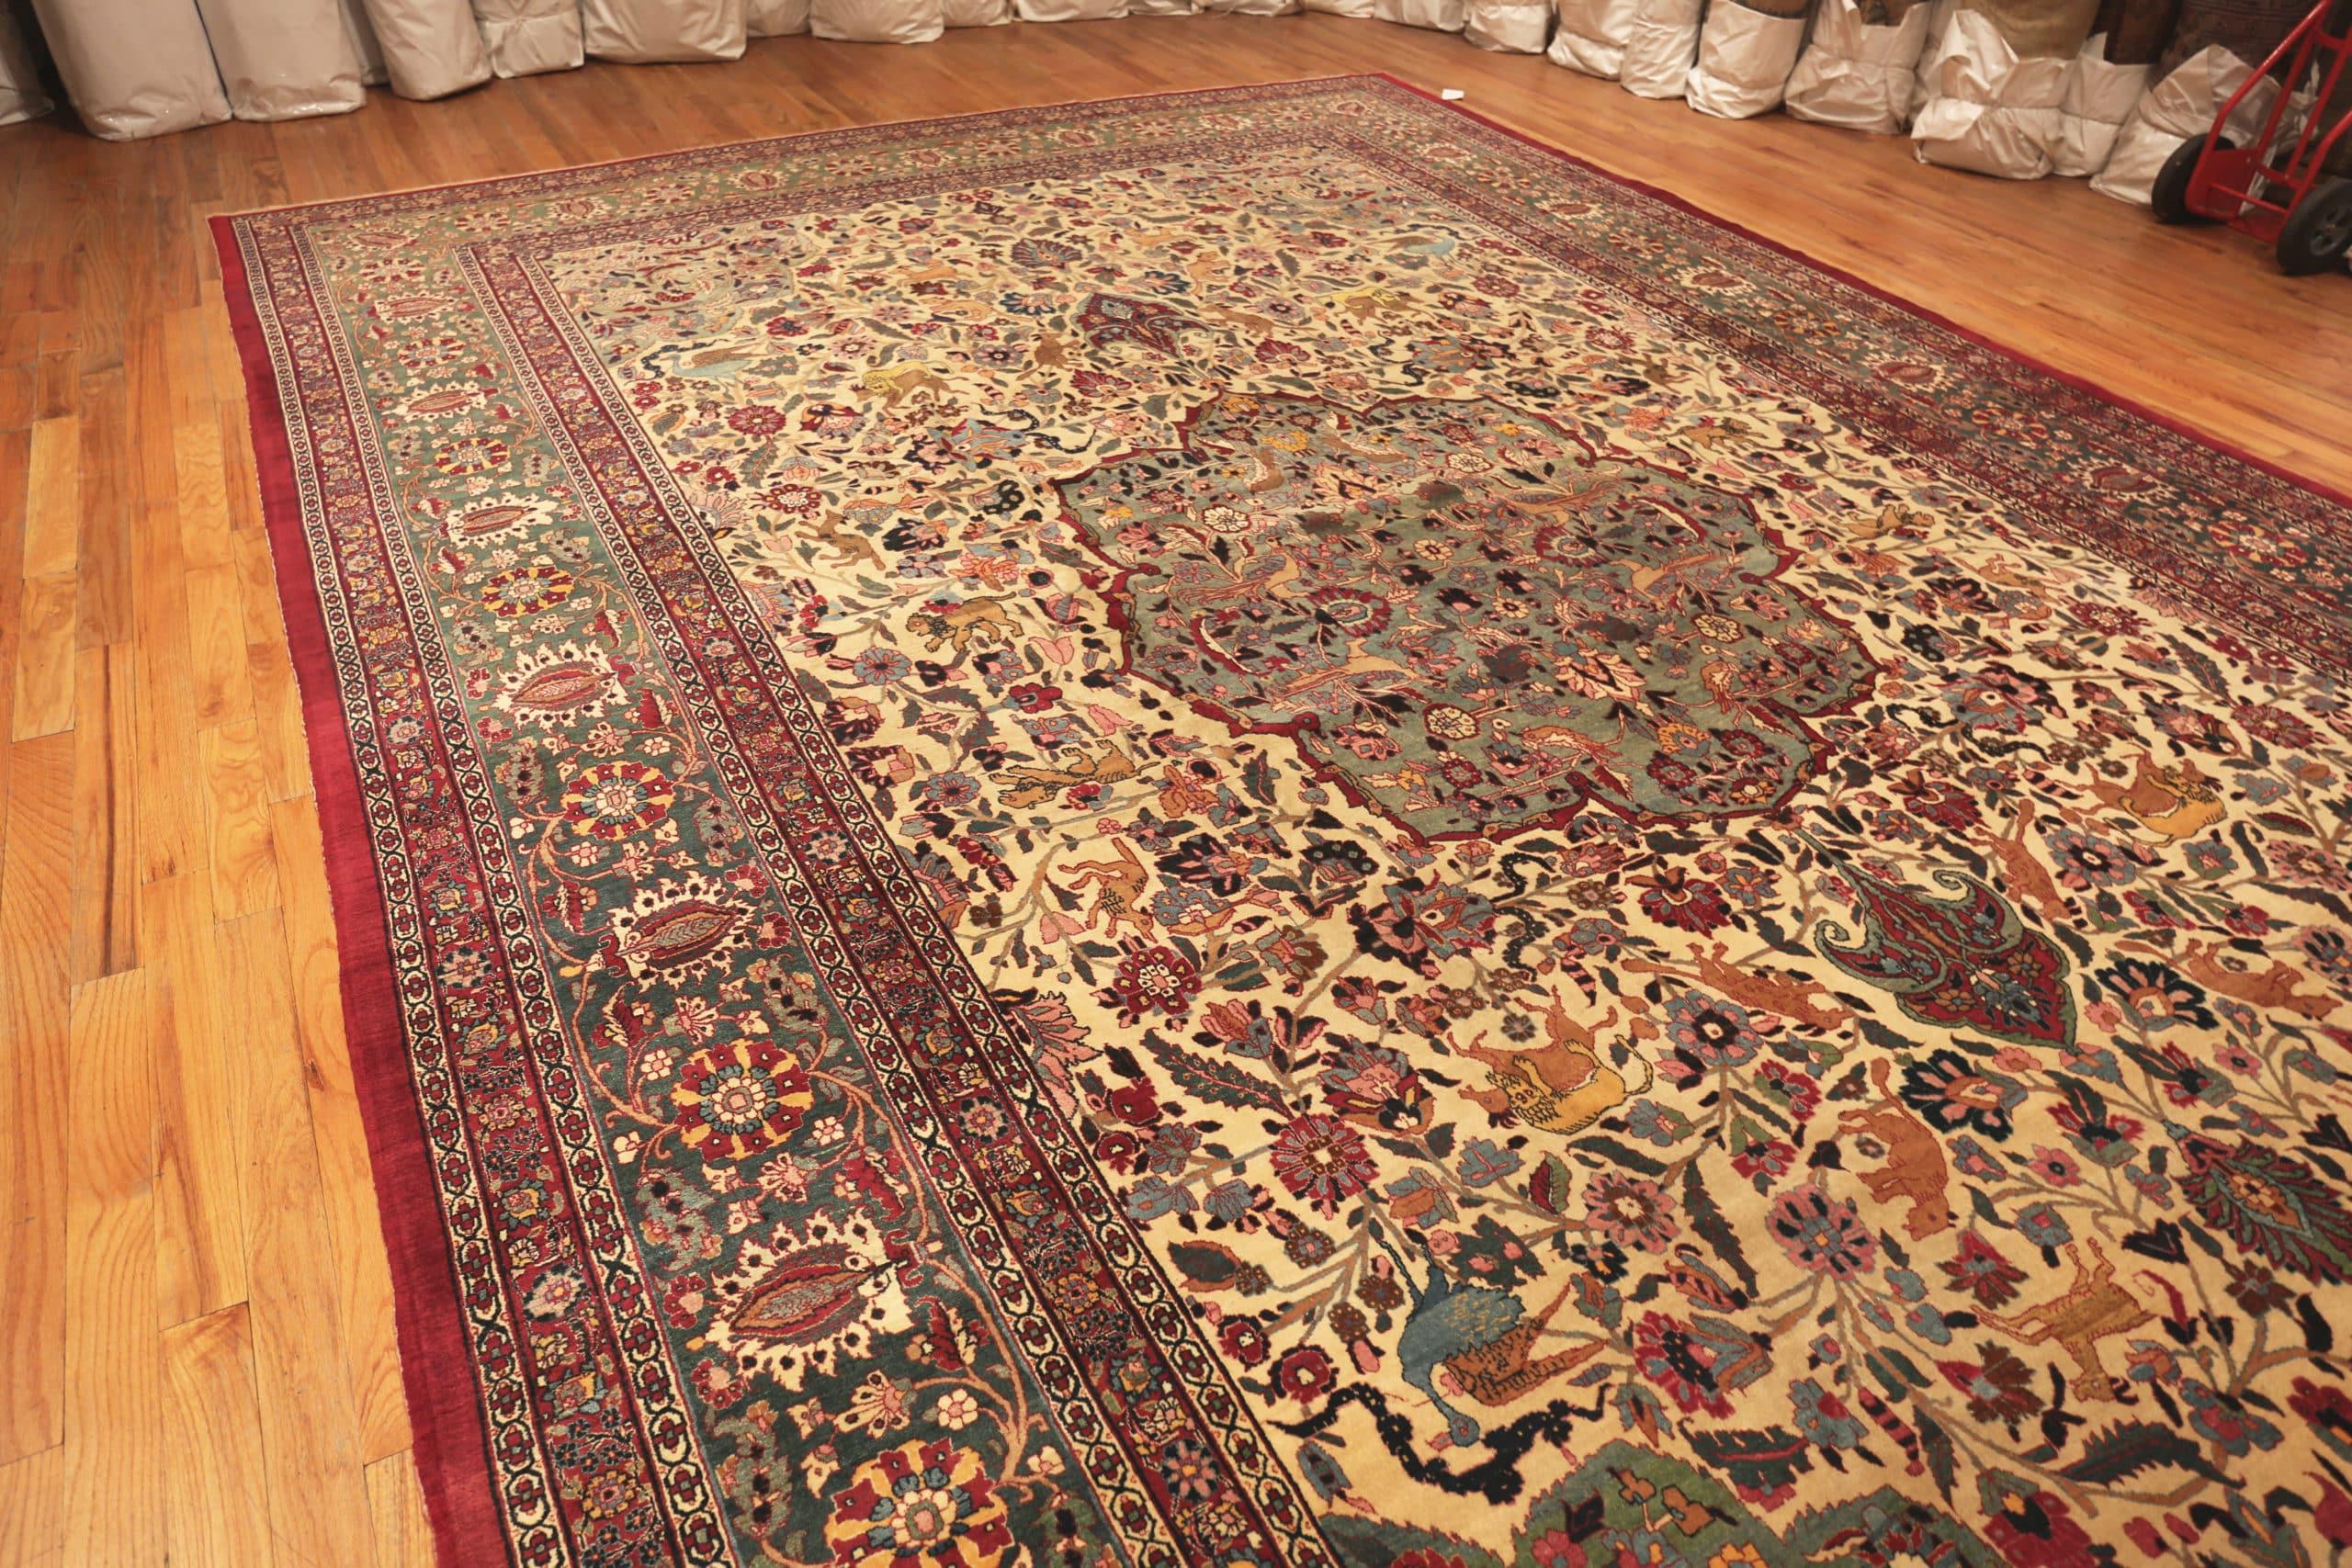 Antique Persian Tehran Rug. Size: 12 ft 6 in x 19 ft 6 in 2